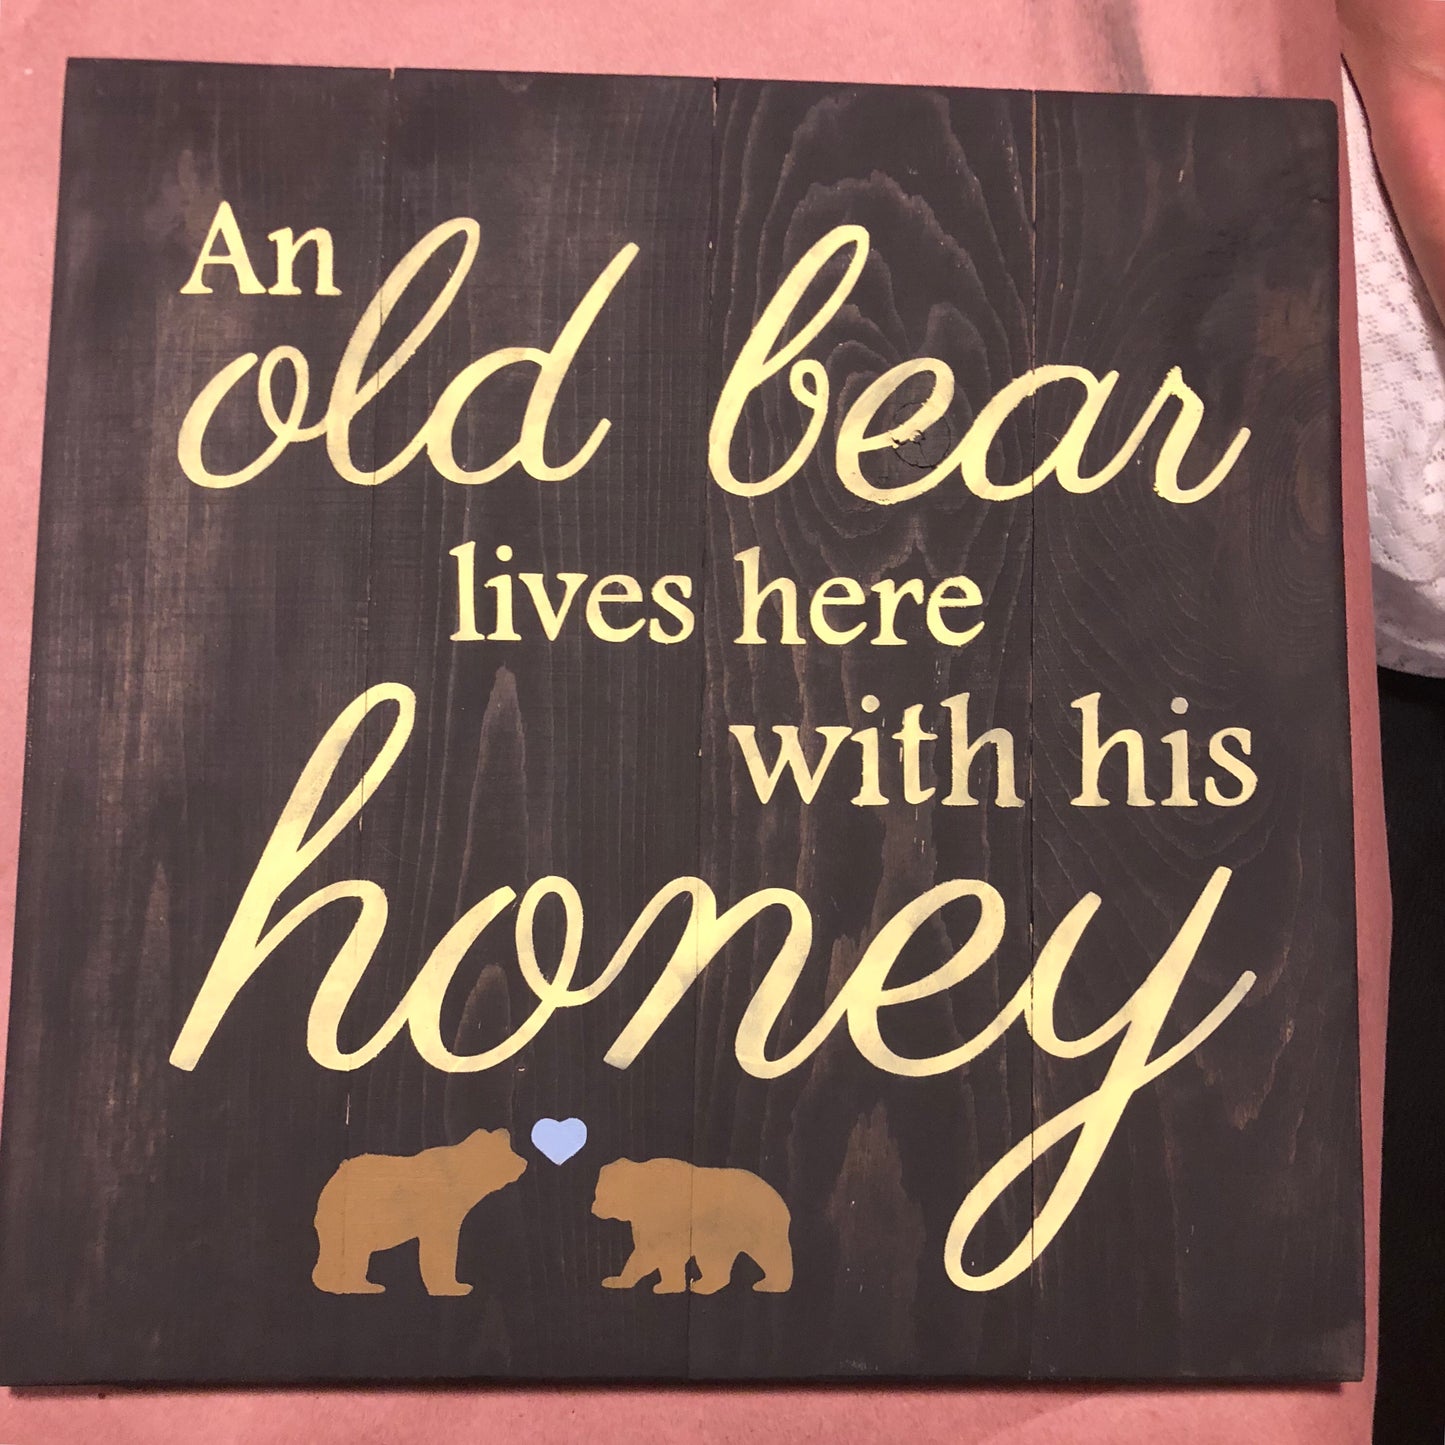 An old bear lives with his honey